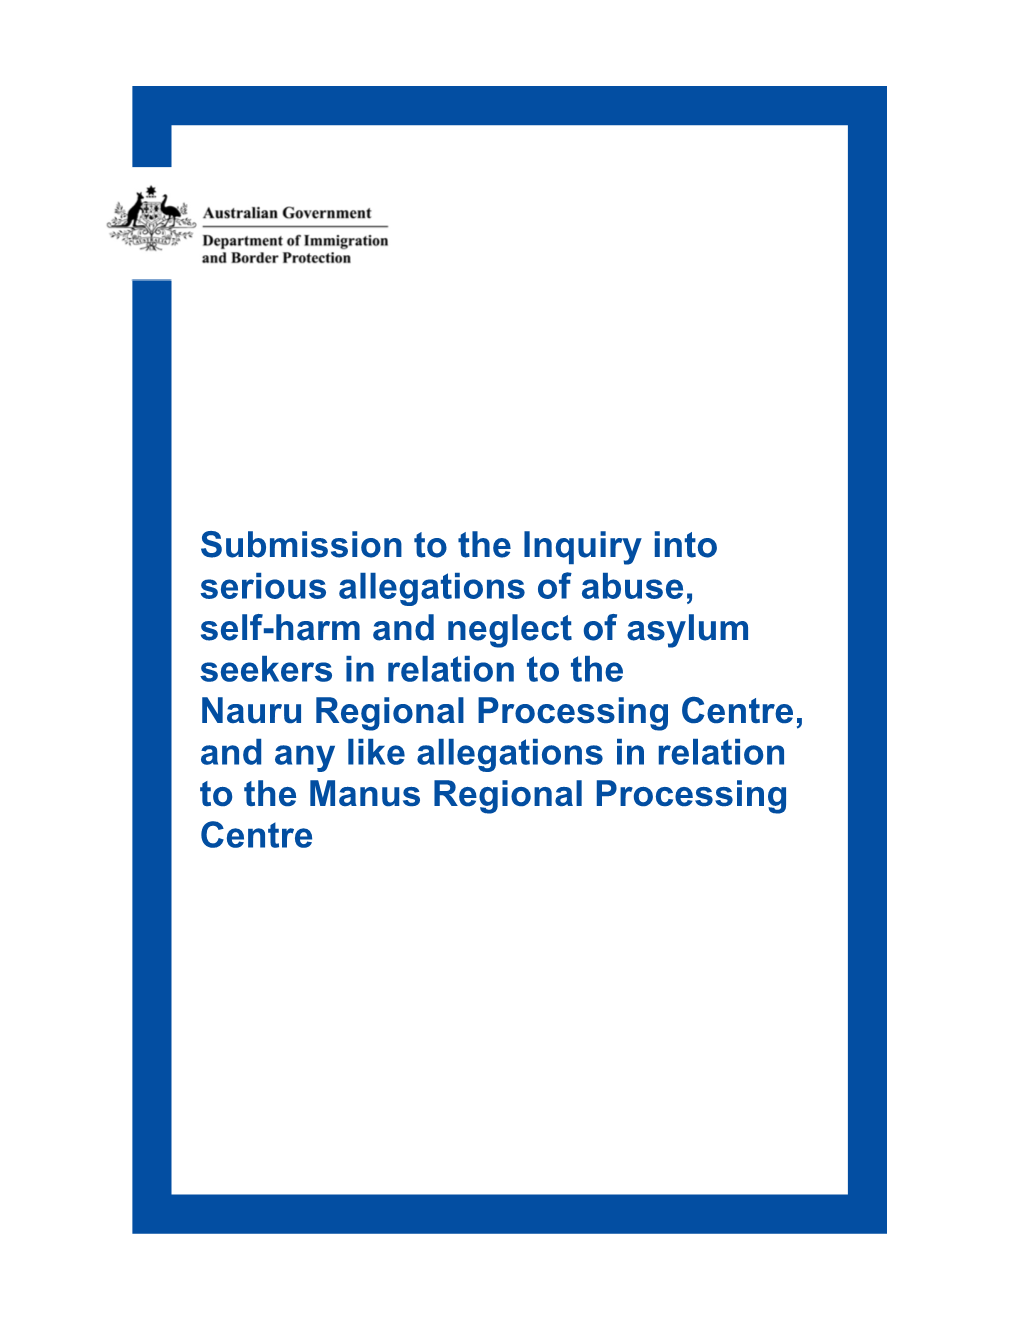 DIBP Submission to the Inquiry Into Serious Allegations of Abuse, Self